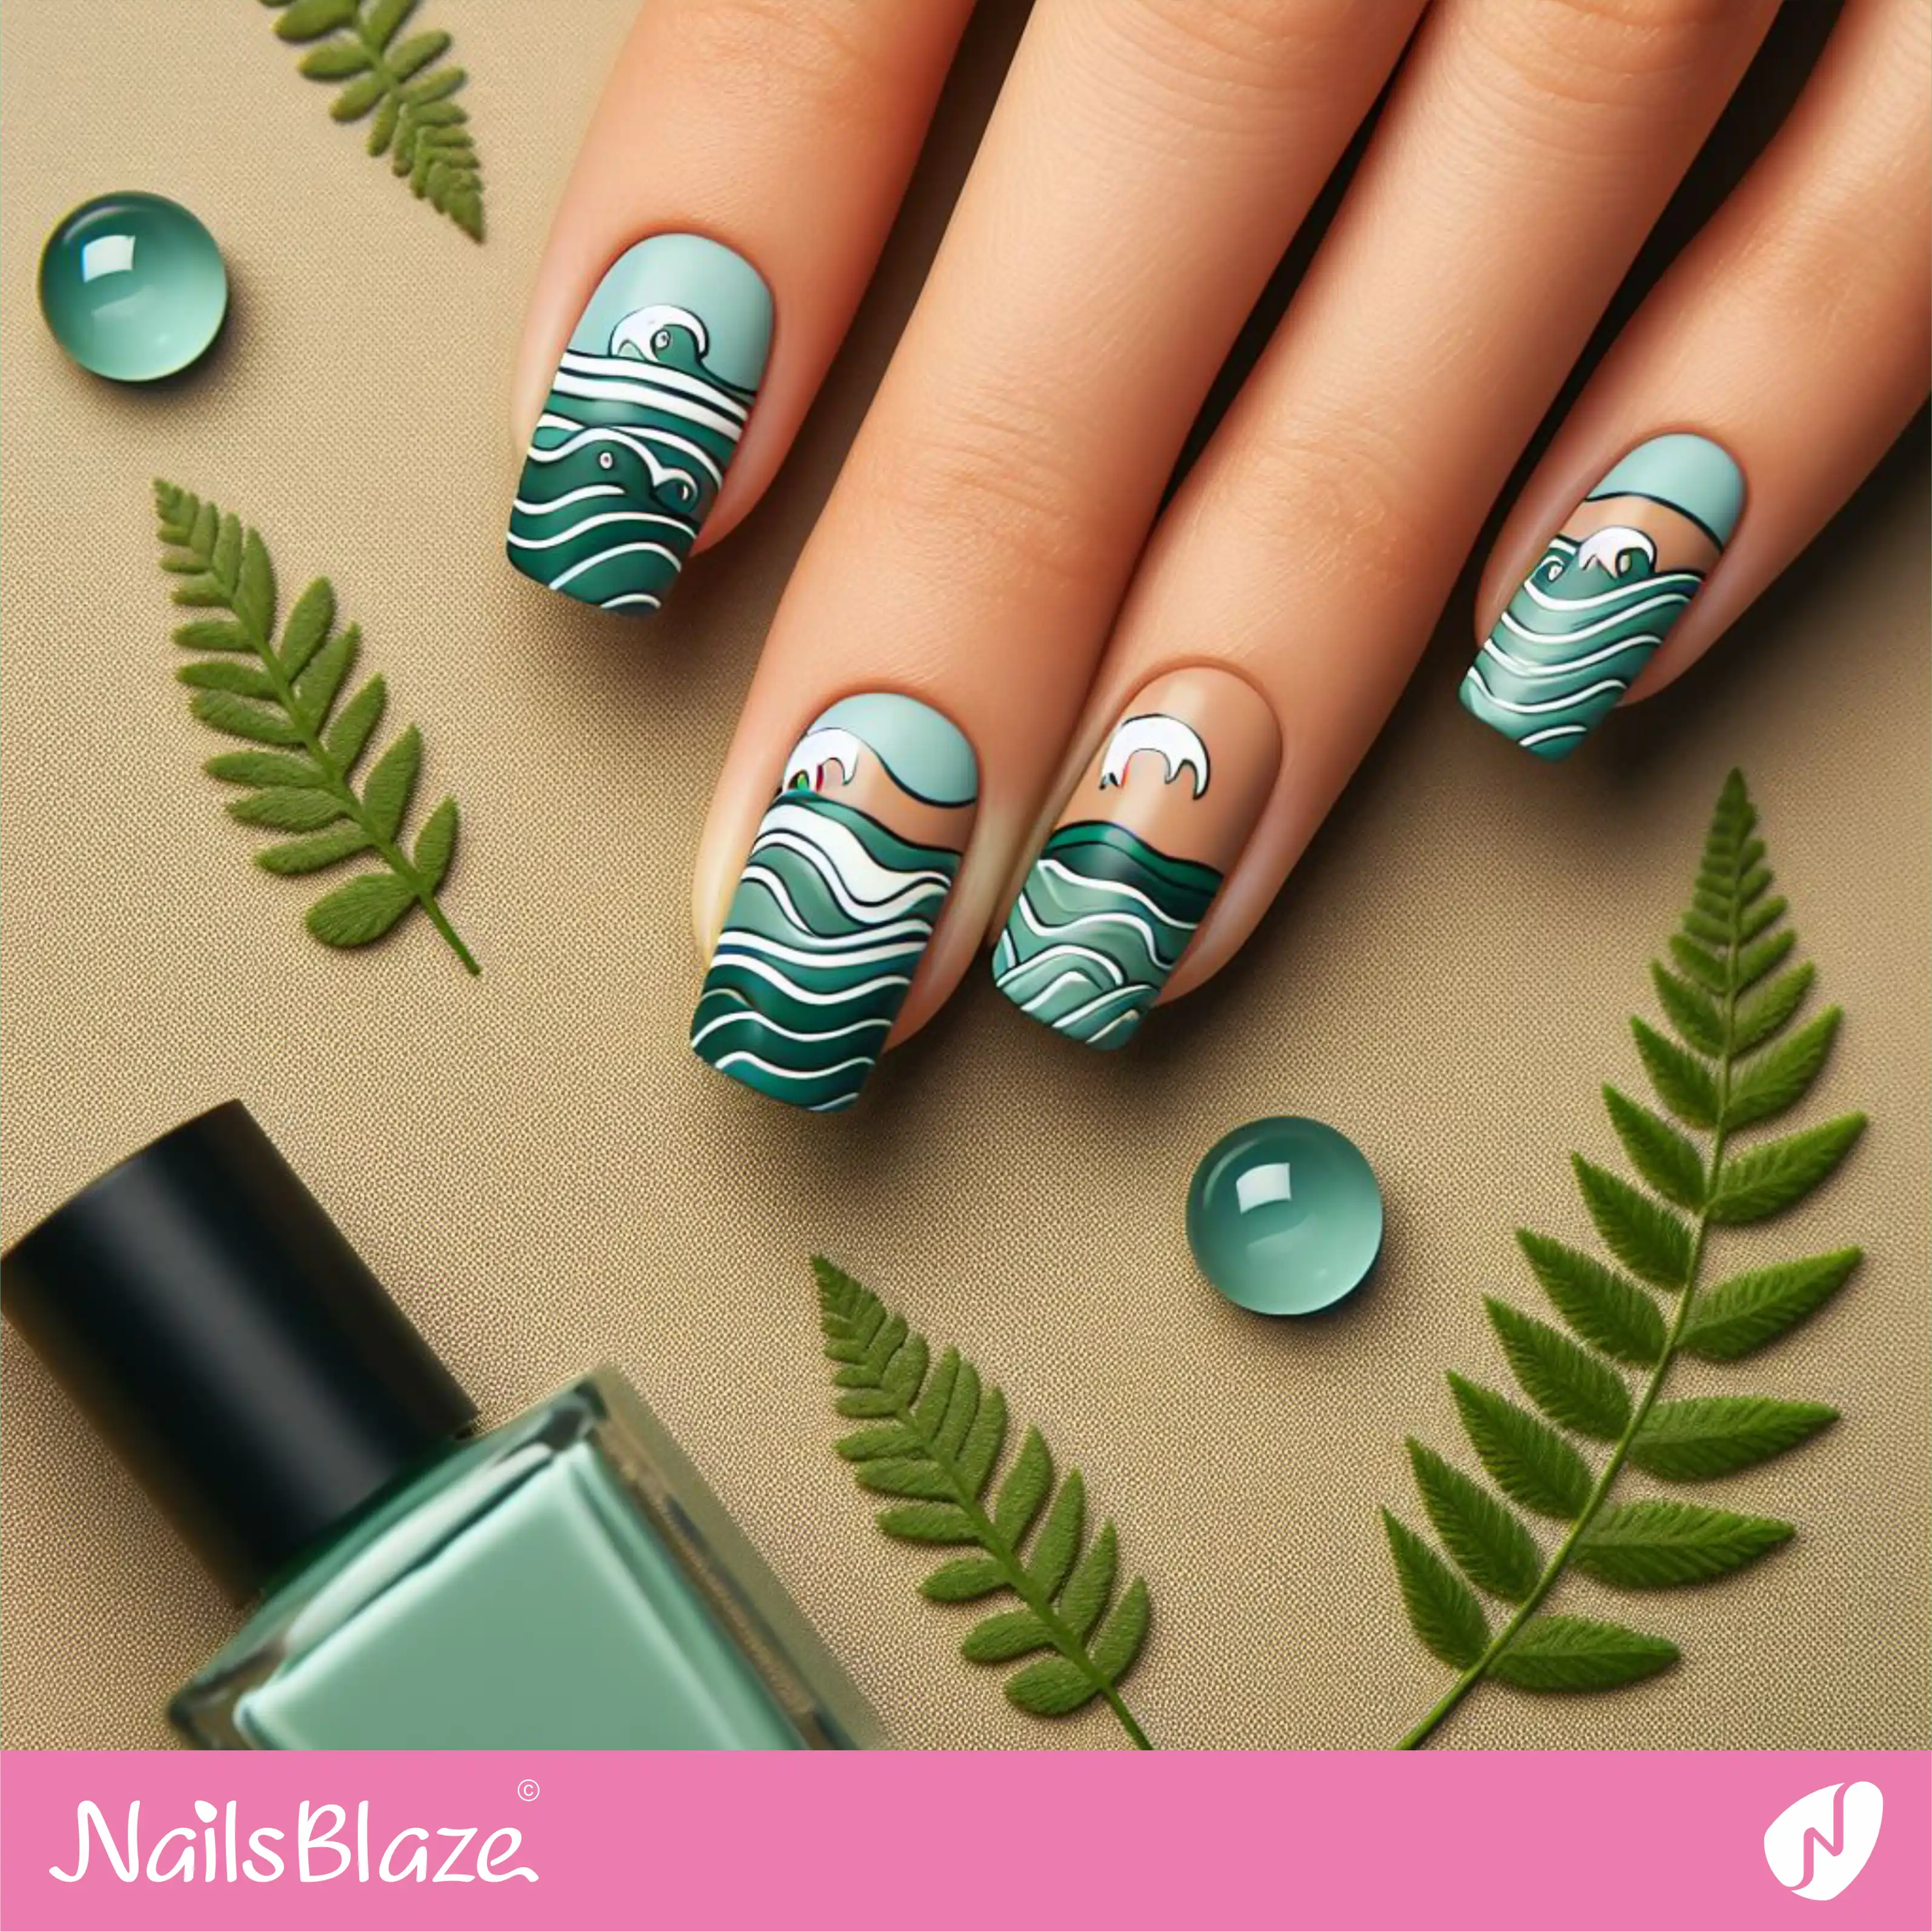 Matte Nails with Ocean Conservation Theme | Save the Ocean Nails - NB3284